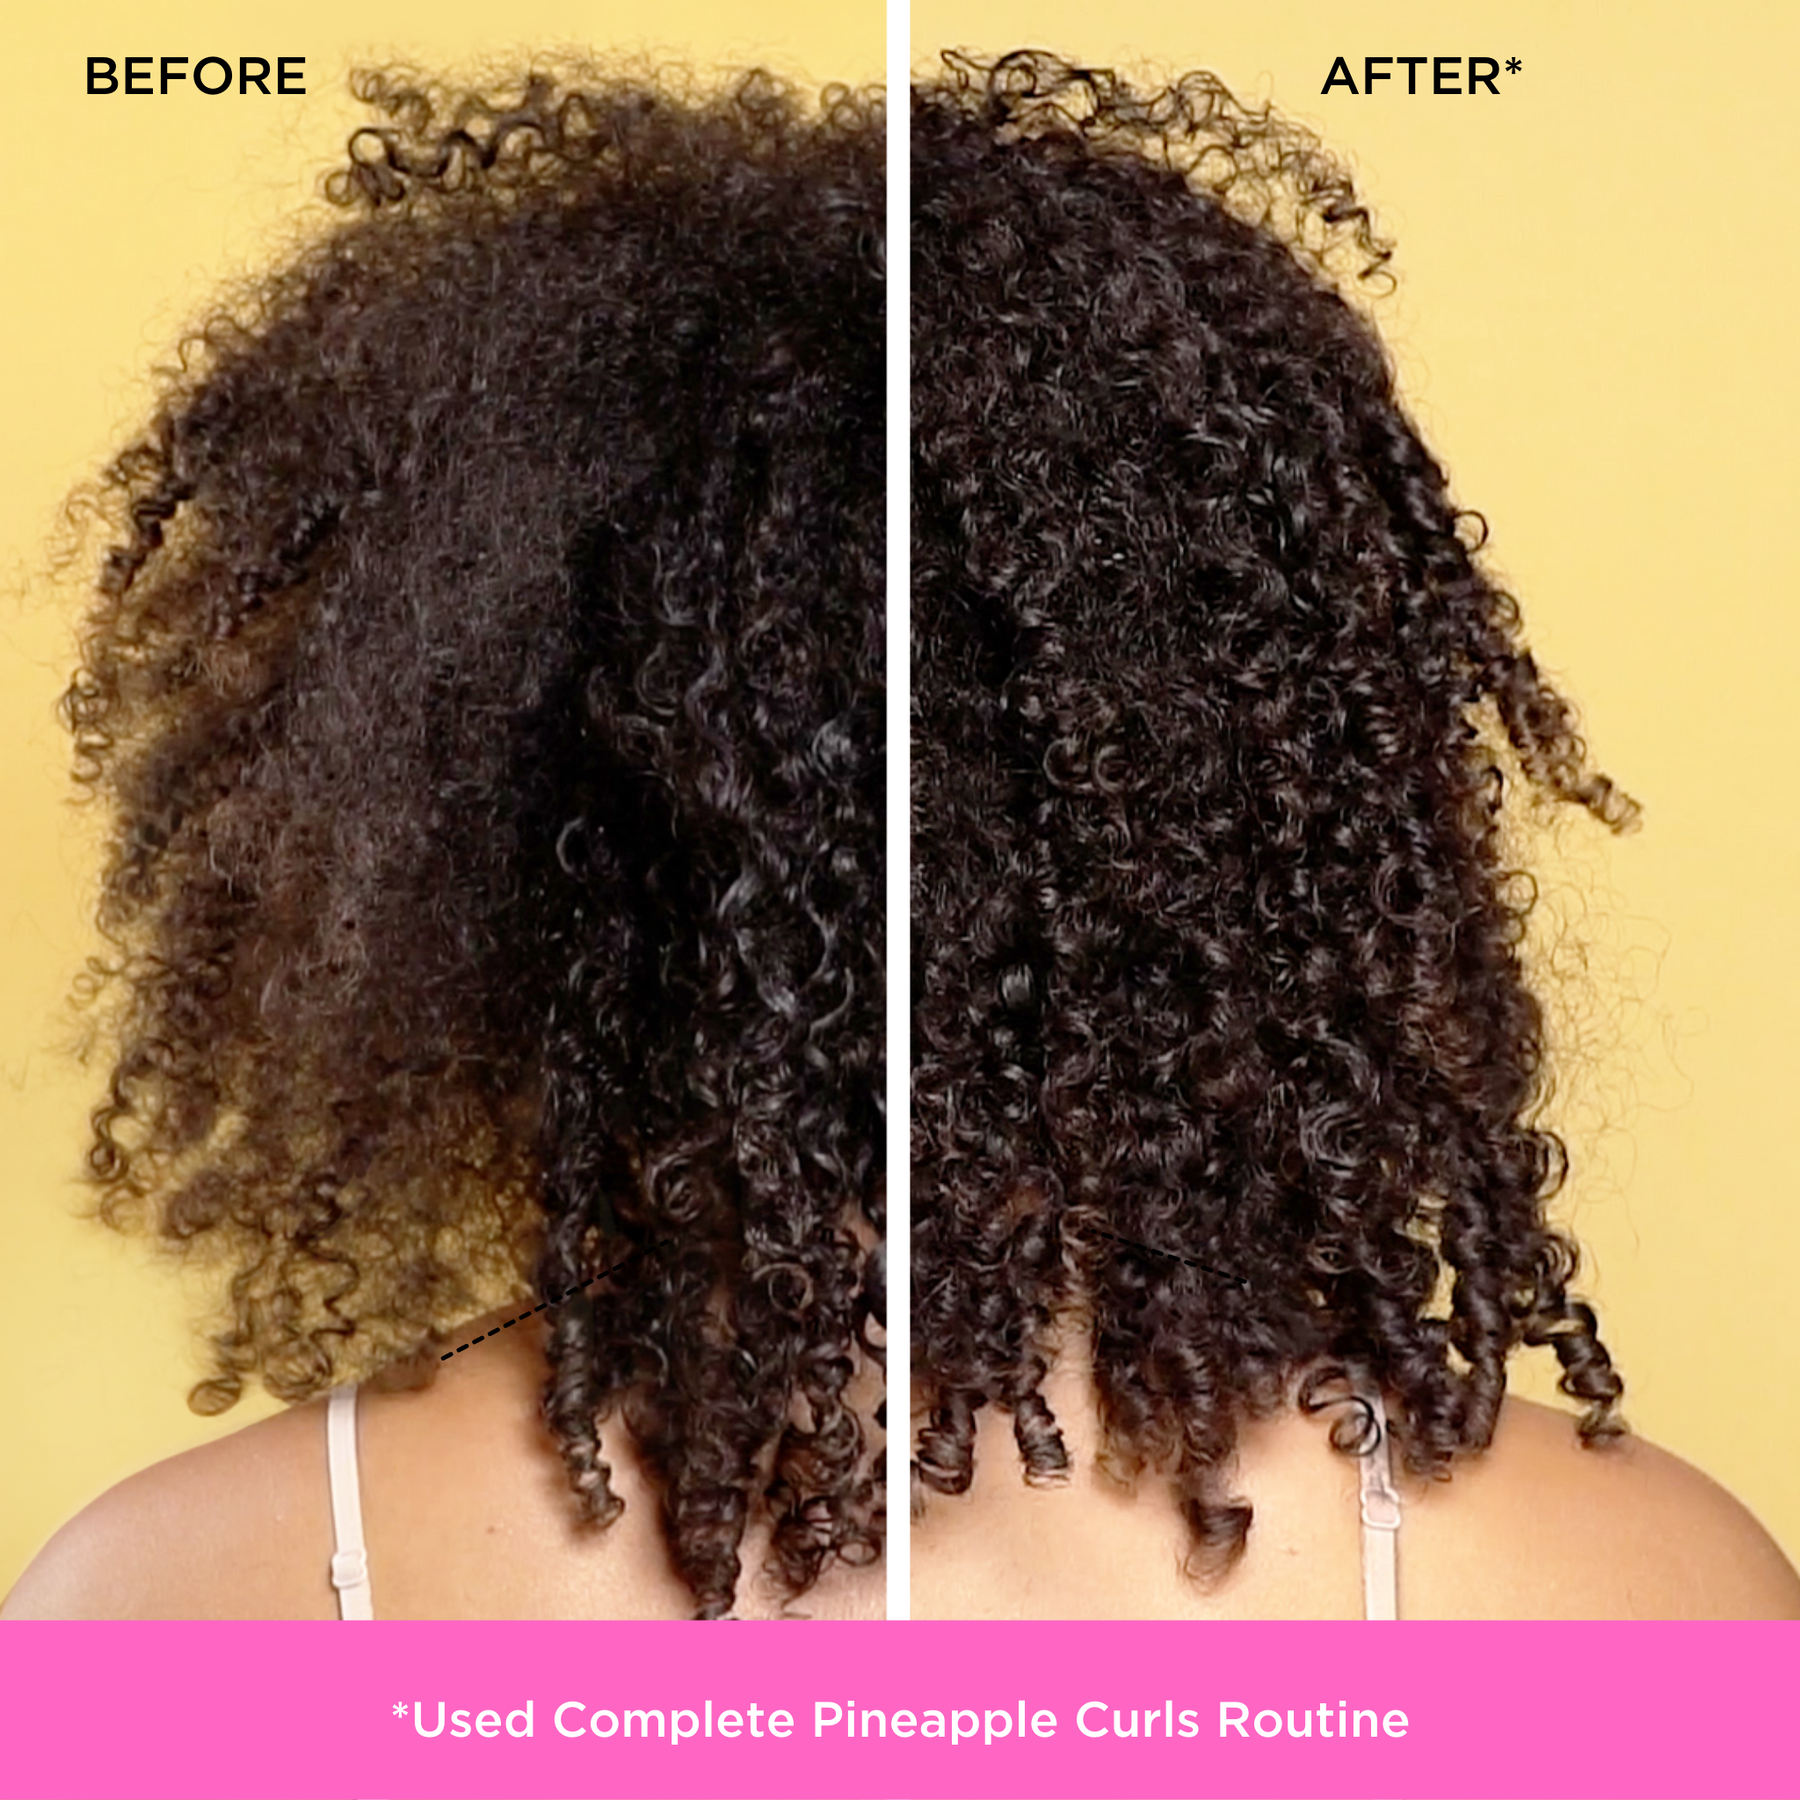 Pineapple Swirl Curl Defining Cream - Haircare - Pacifica Beauty